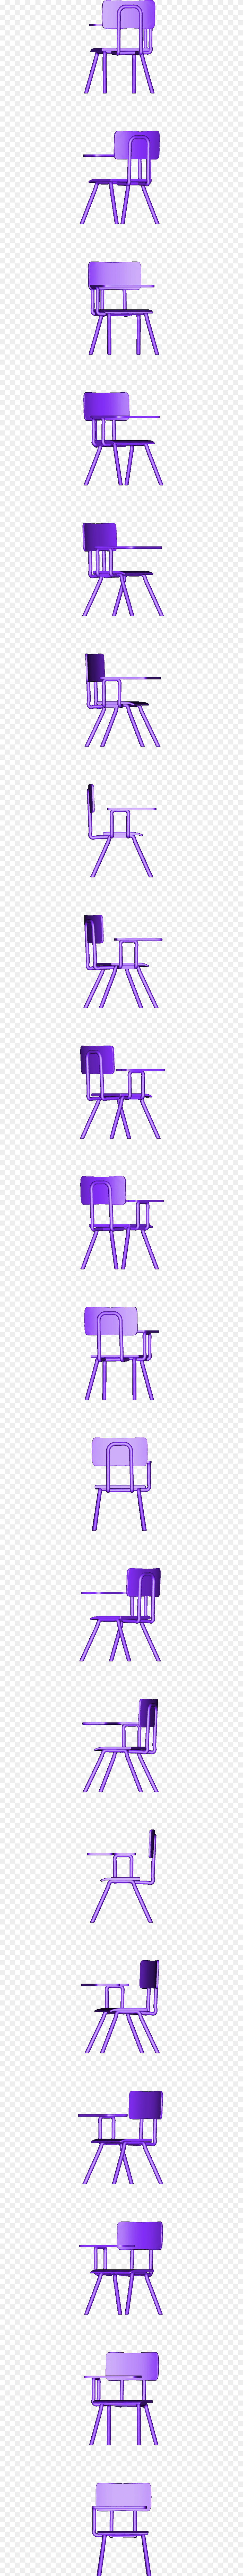 Neoclassical Chair, Light, Purple, Neon Free Png Download